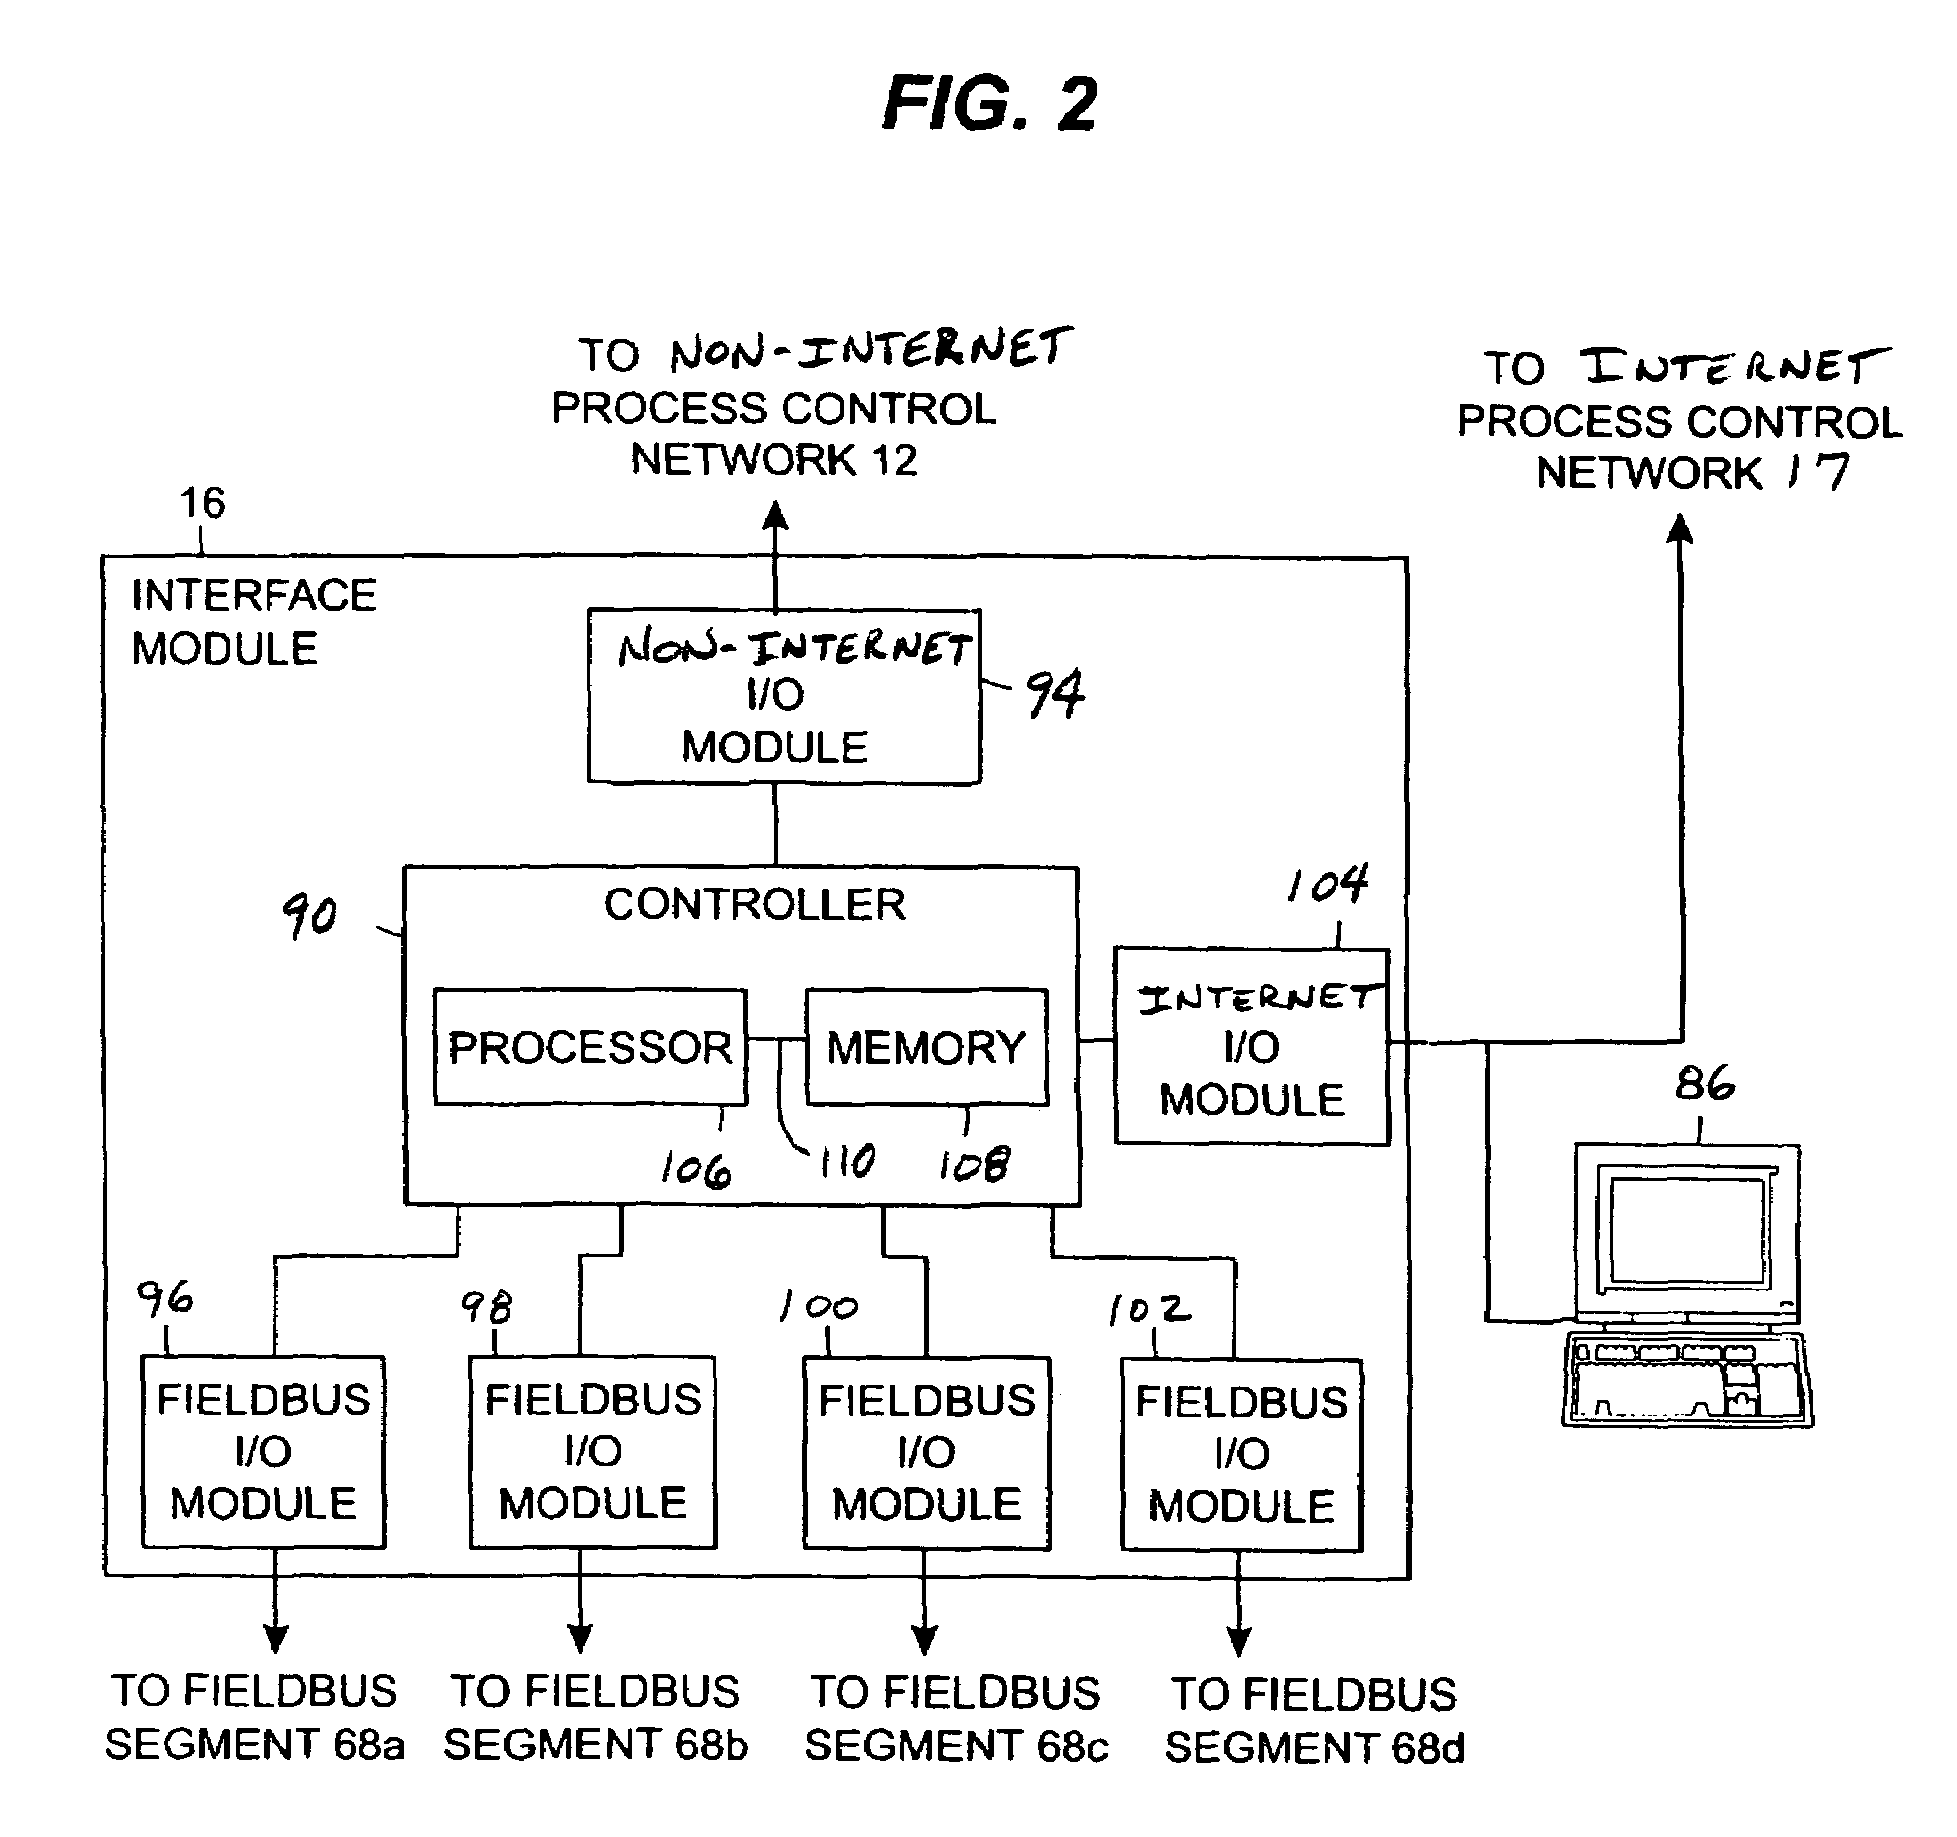 Interface module for use with a fieldbus device network and with internet and non-internet based process control networks